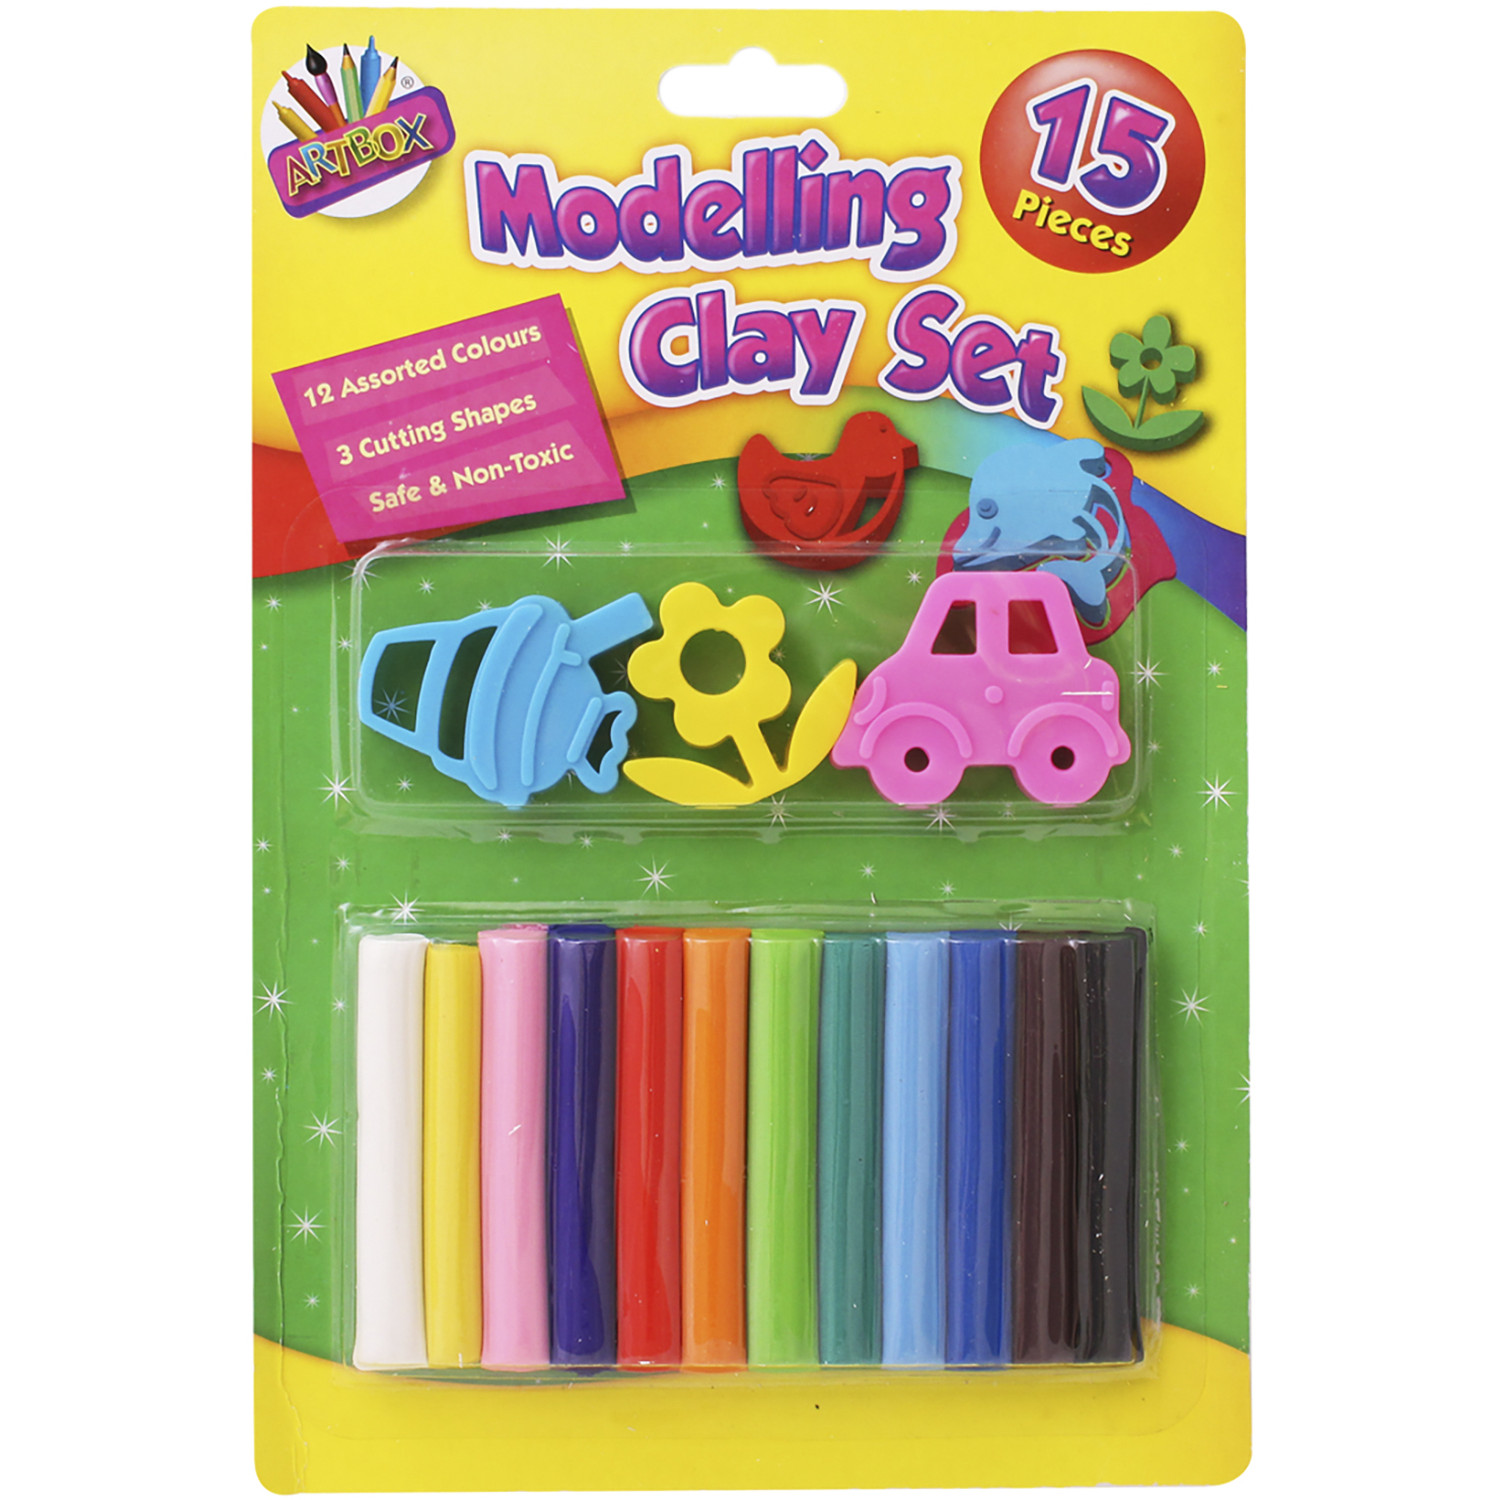 15 Piece Modelling Clay Set Image 2